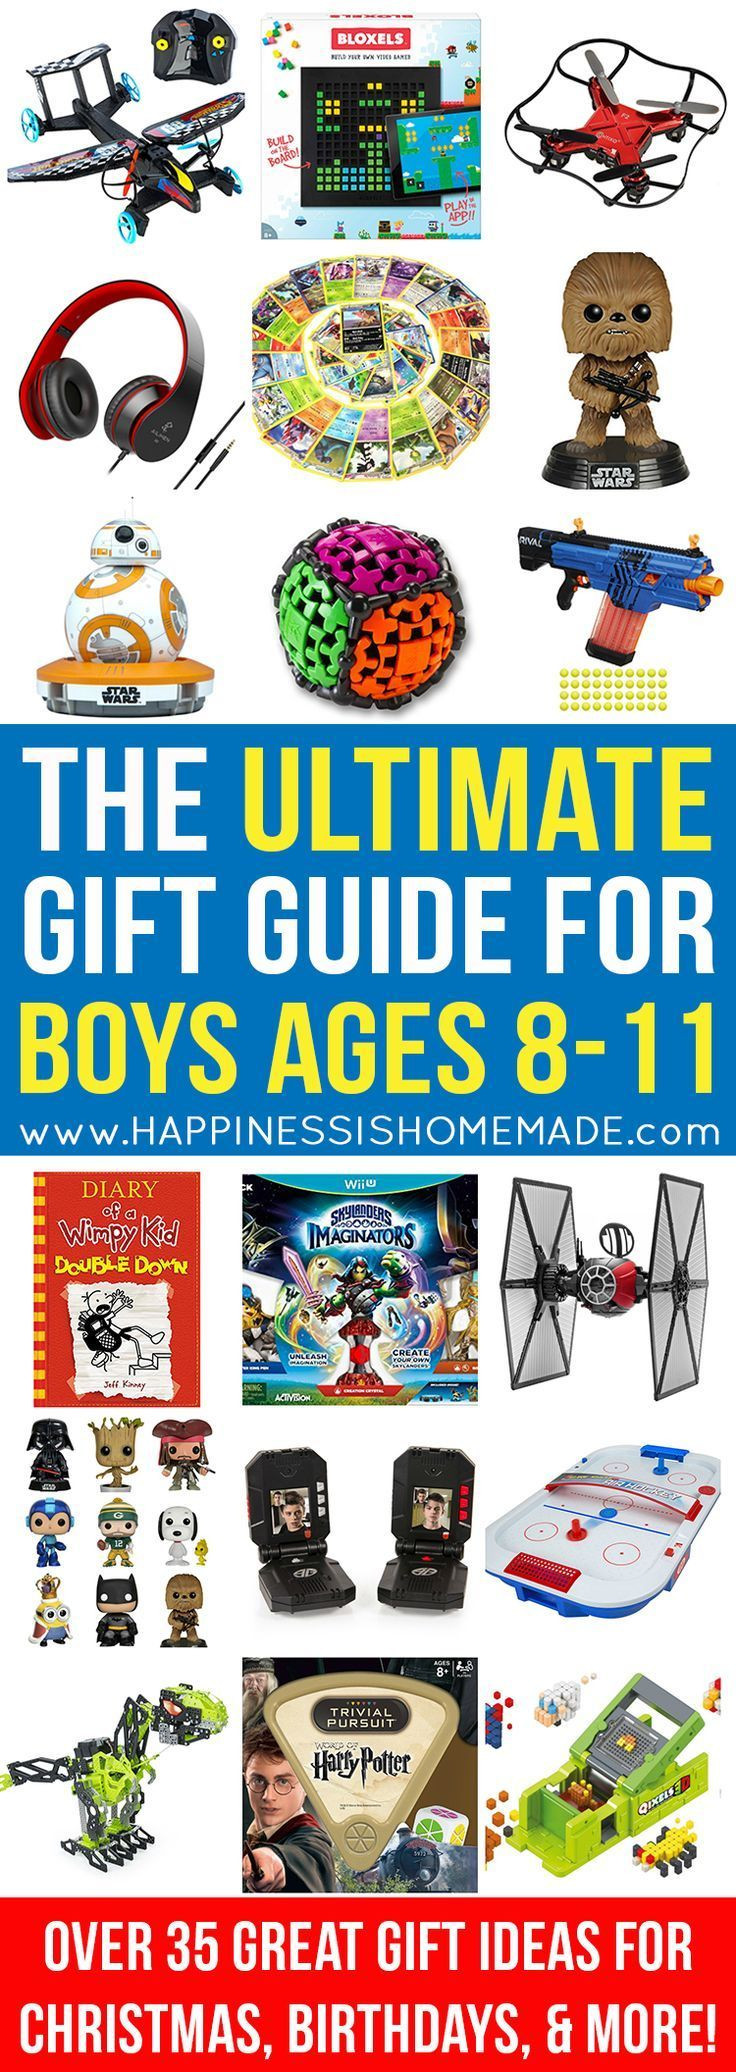 Gift Ideas For Boys Age 3
 The Best Gift Ideas for Boys Ages 8 11 Looking for t